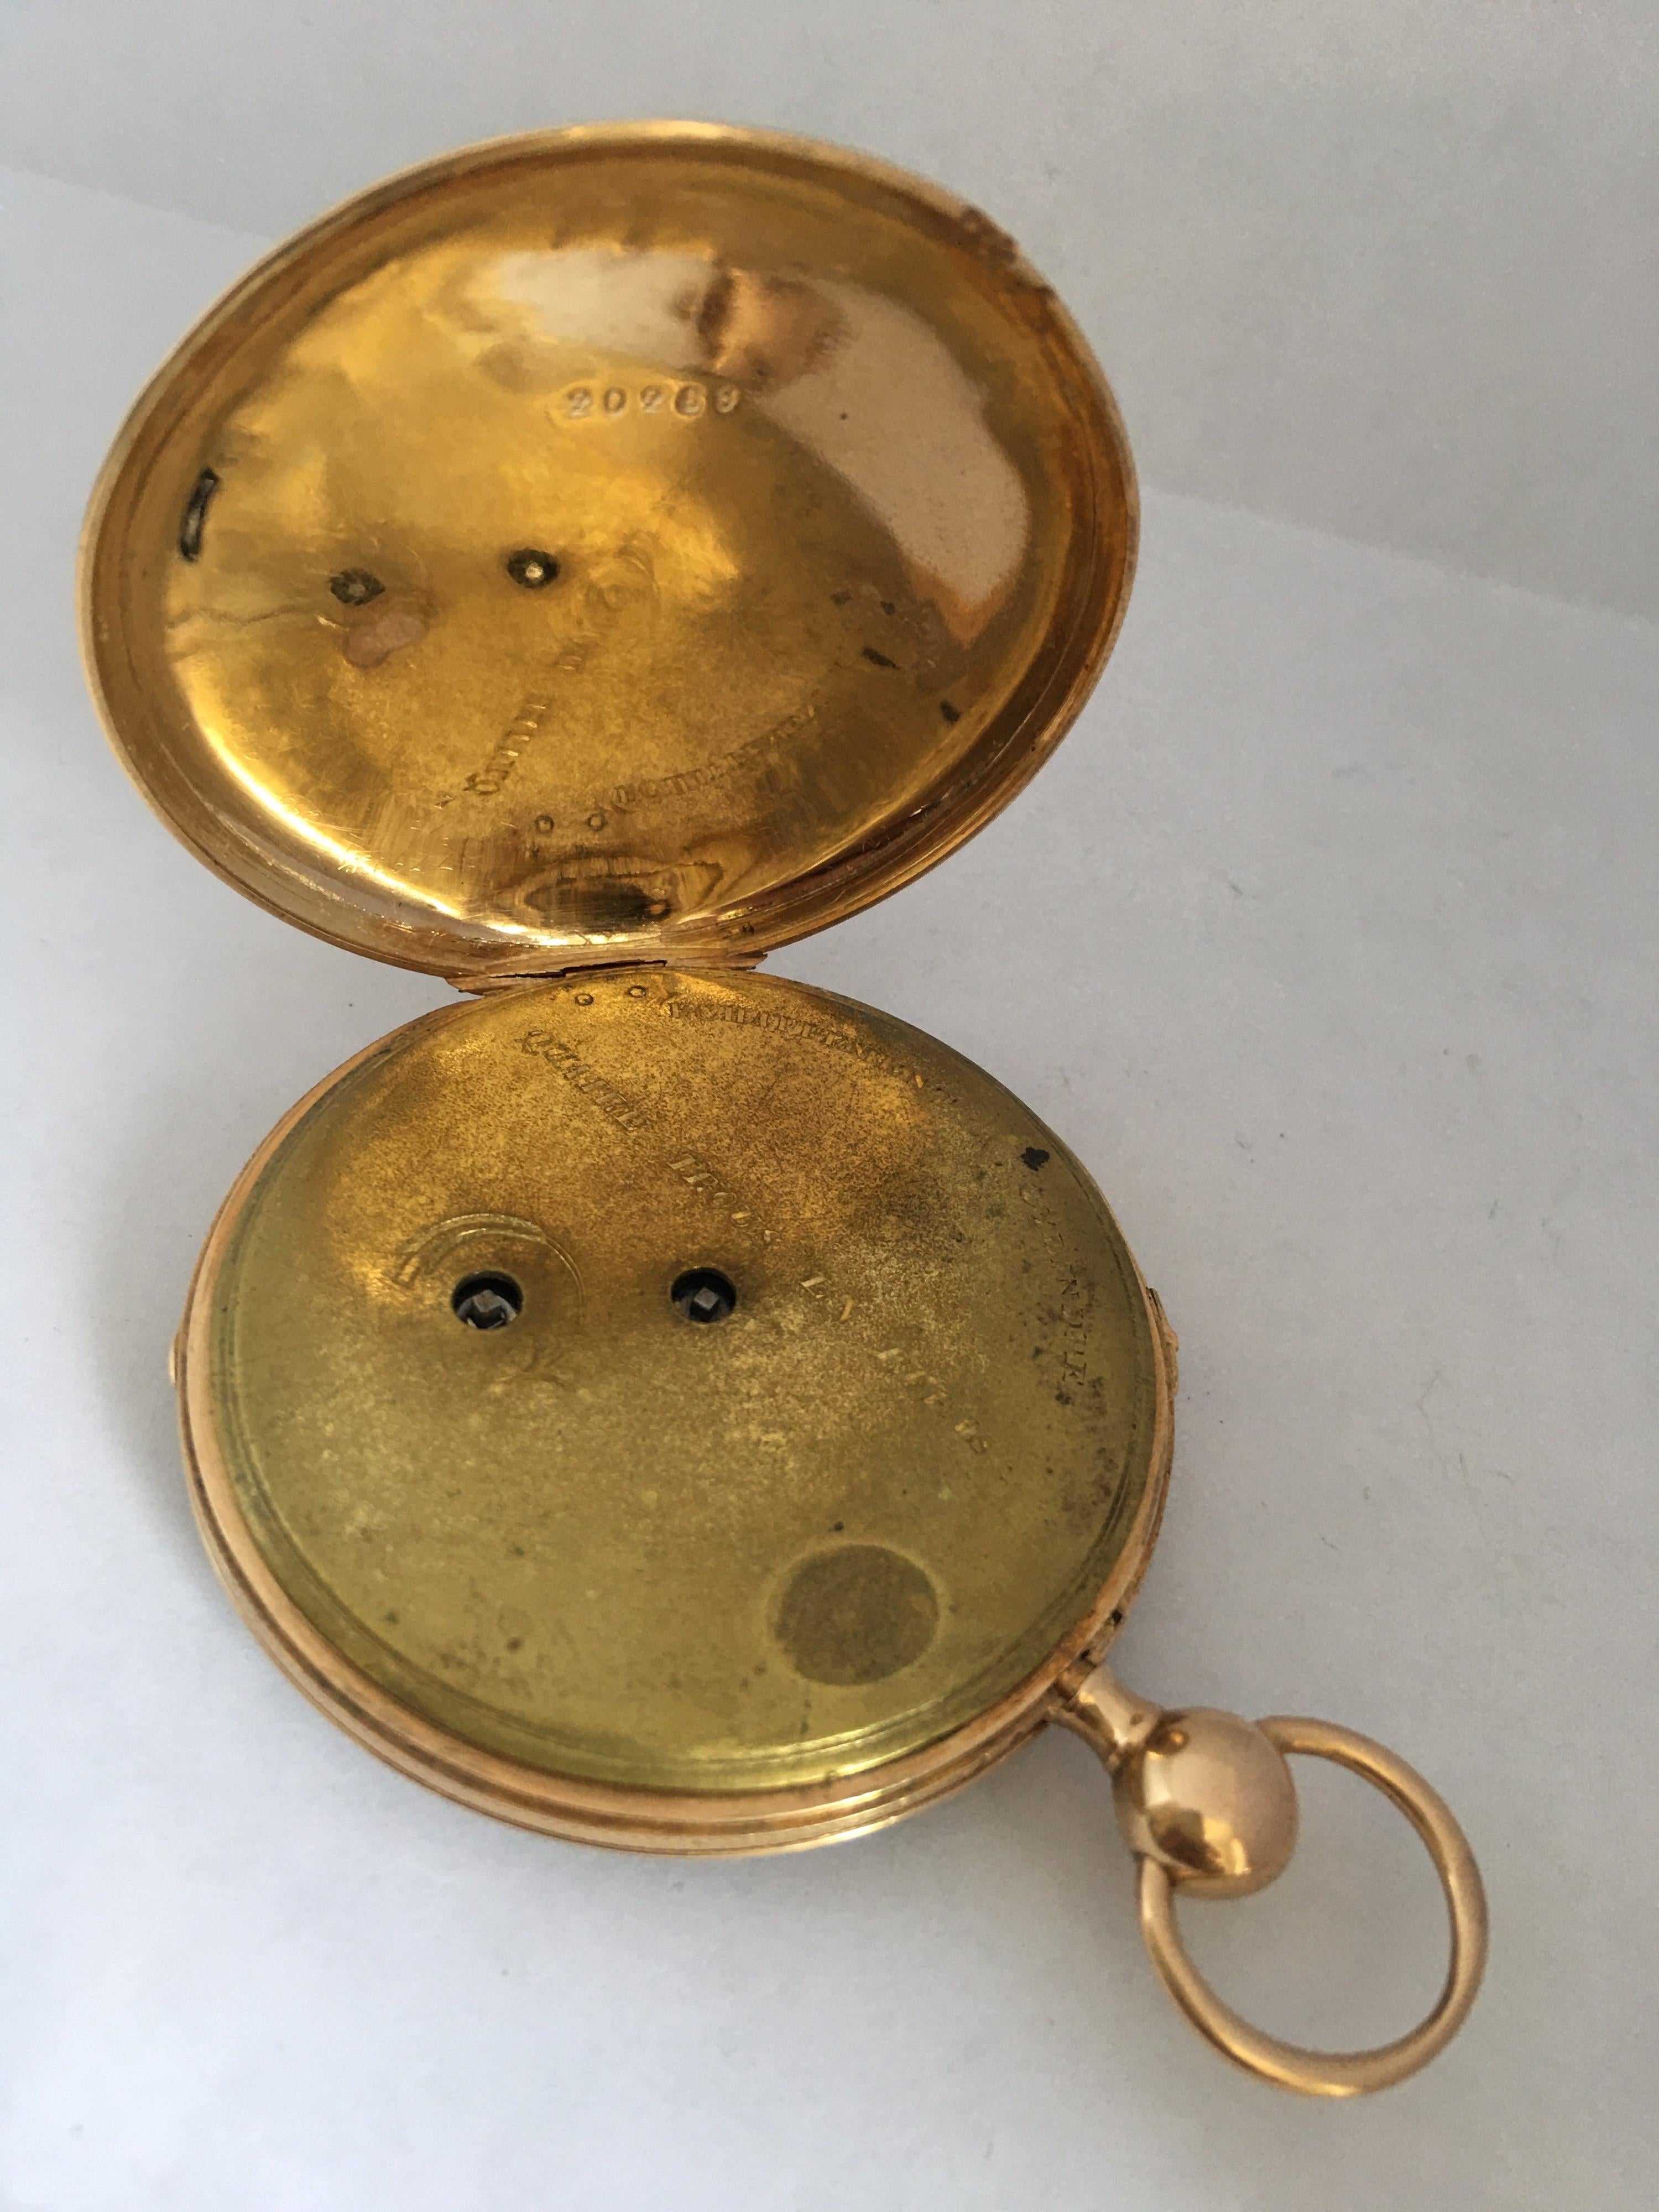 Antique Slim 18 Karat Gold Quarter Pump Repeating Pocket Watch In Good Condition For Sale In Carlisle, GB